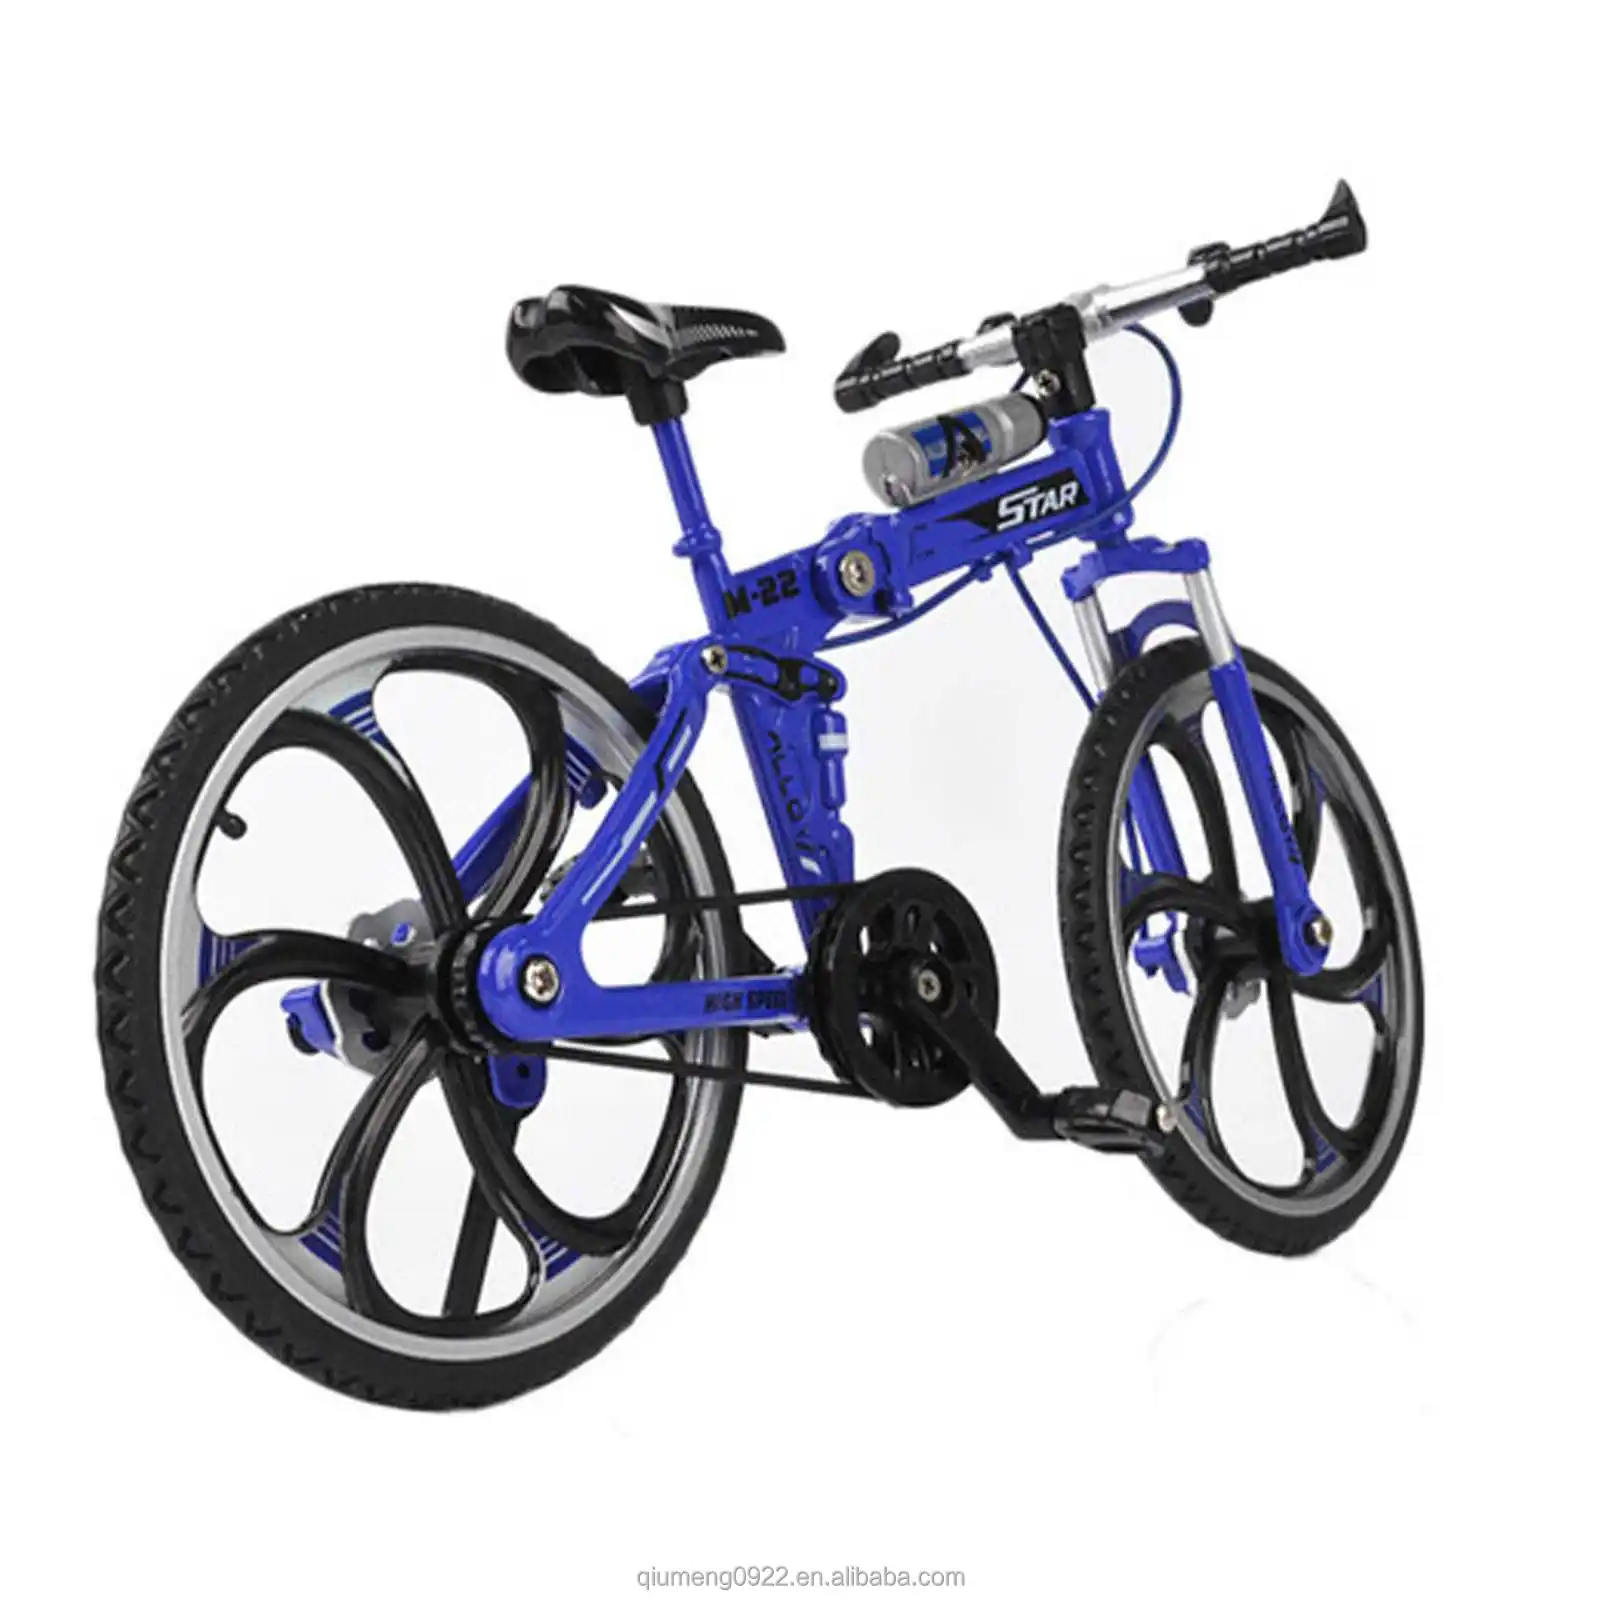 1:8 Scale L Size Aluminum Alloy Cycling Model Simulation Road Bike Kids Toy #8Y 